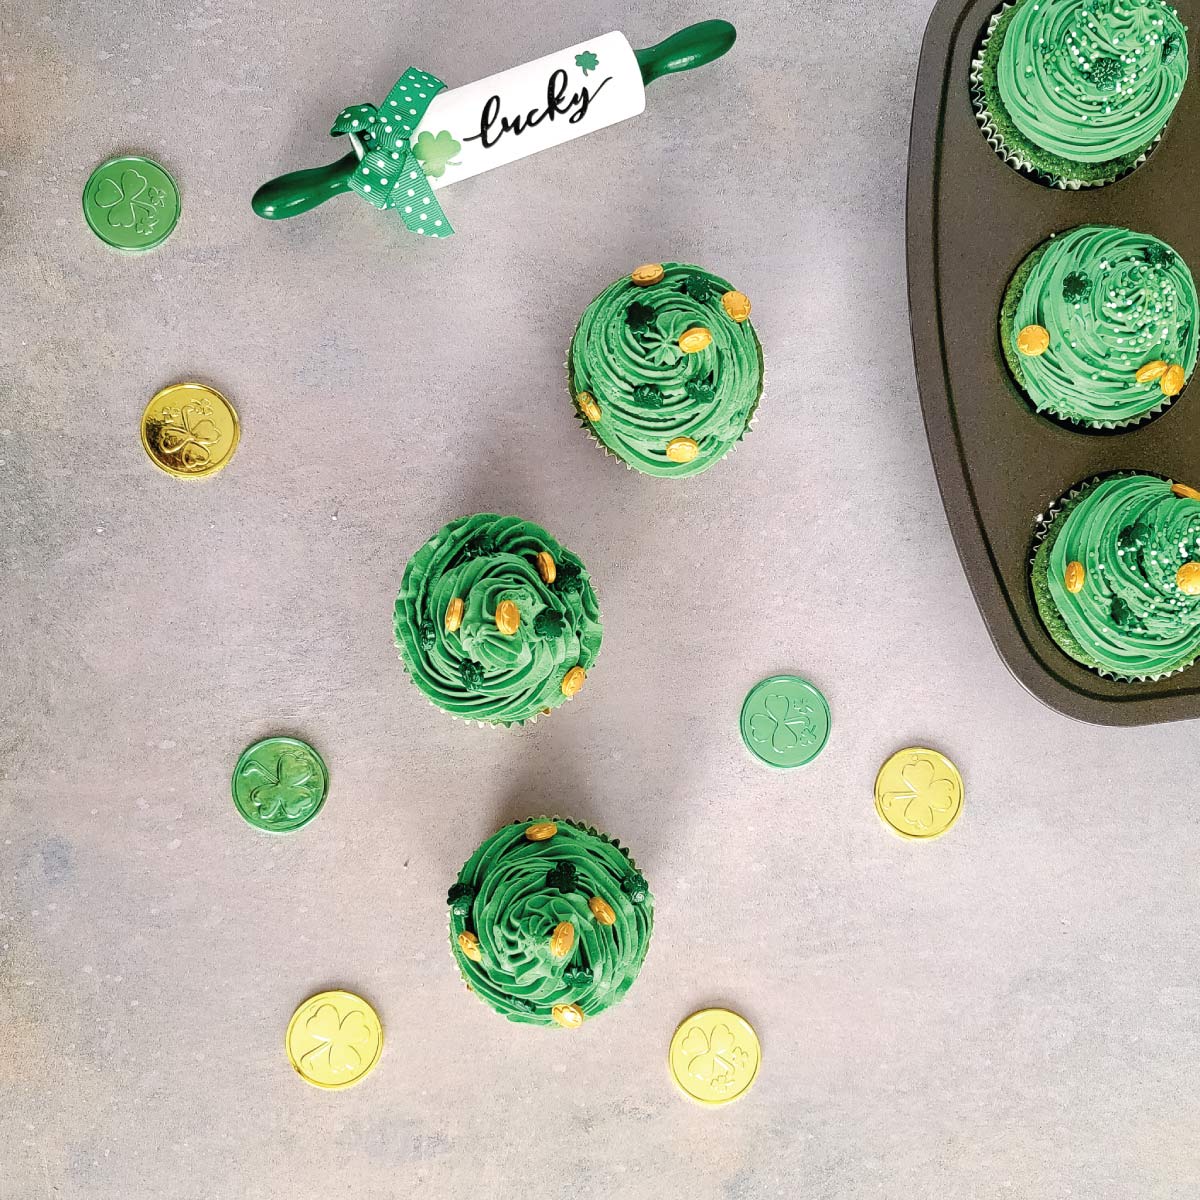 Green cupcakes with green icing decorated for St. Patrick's Day.